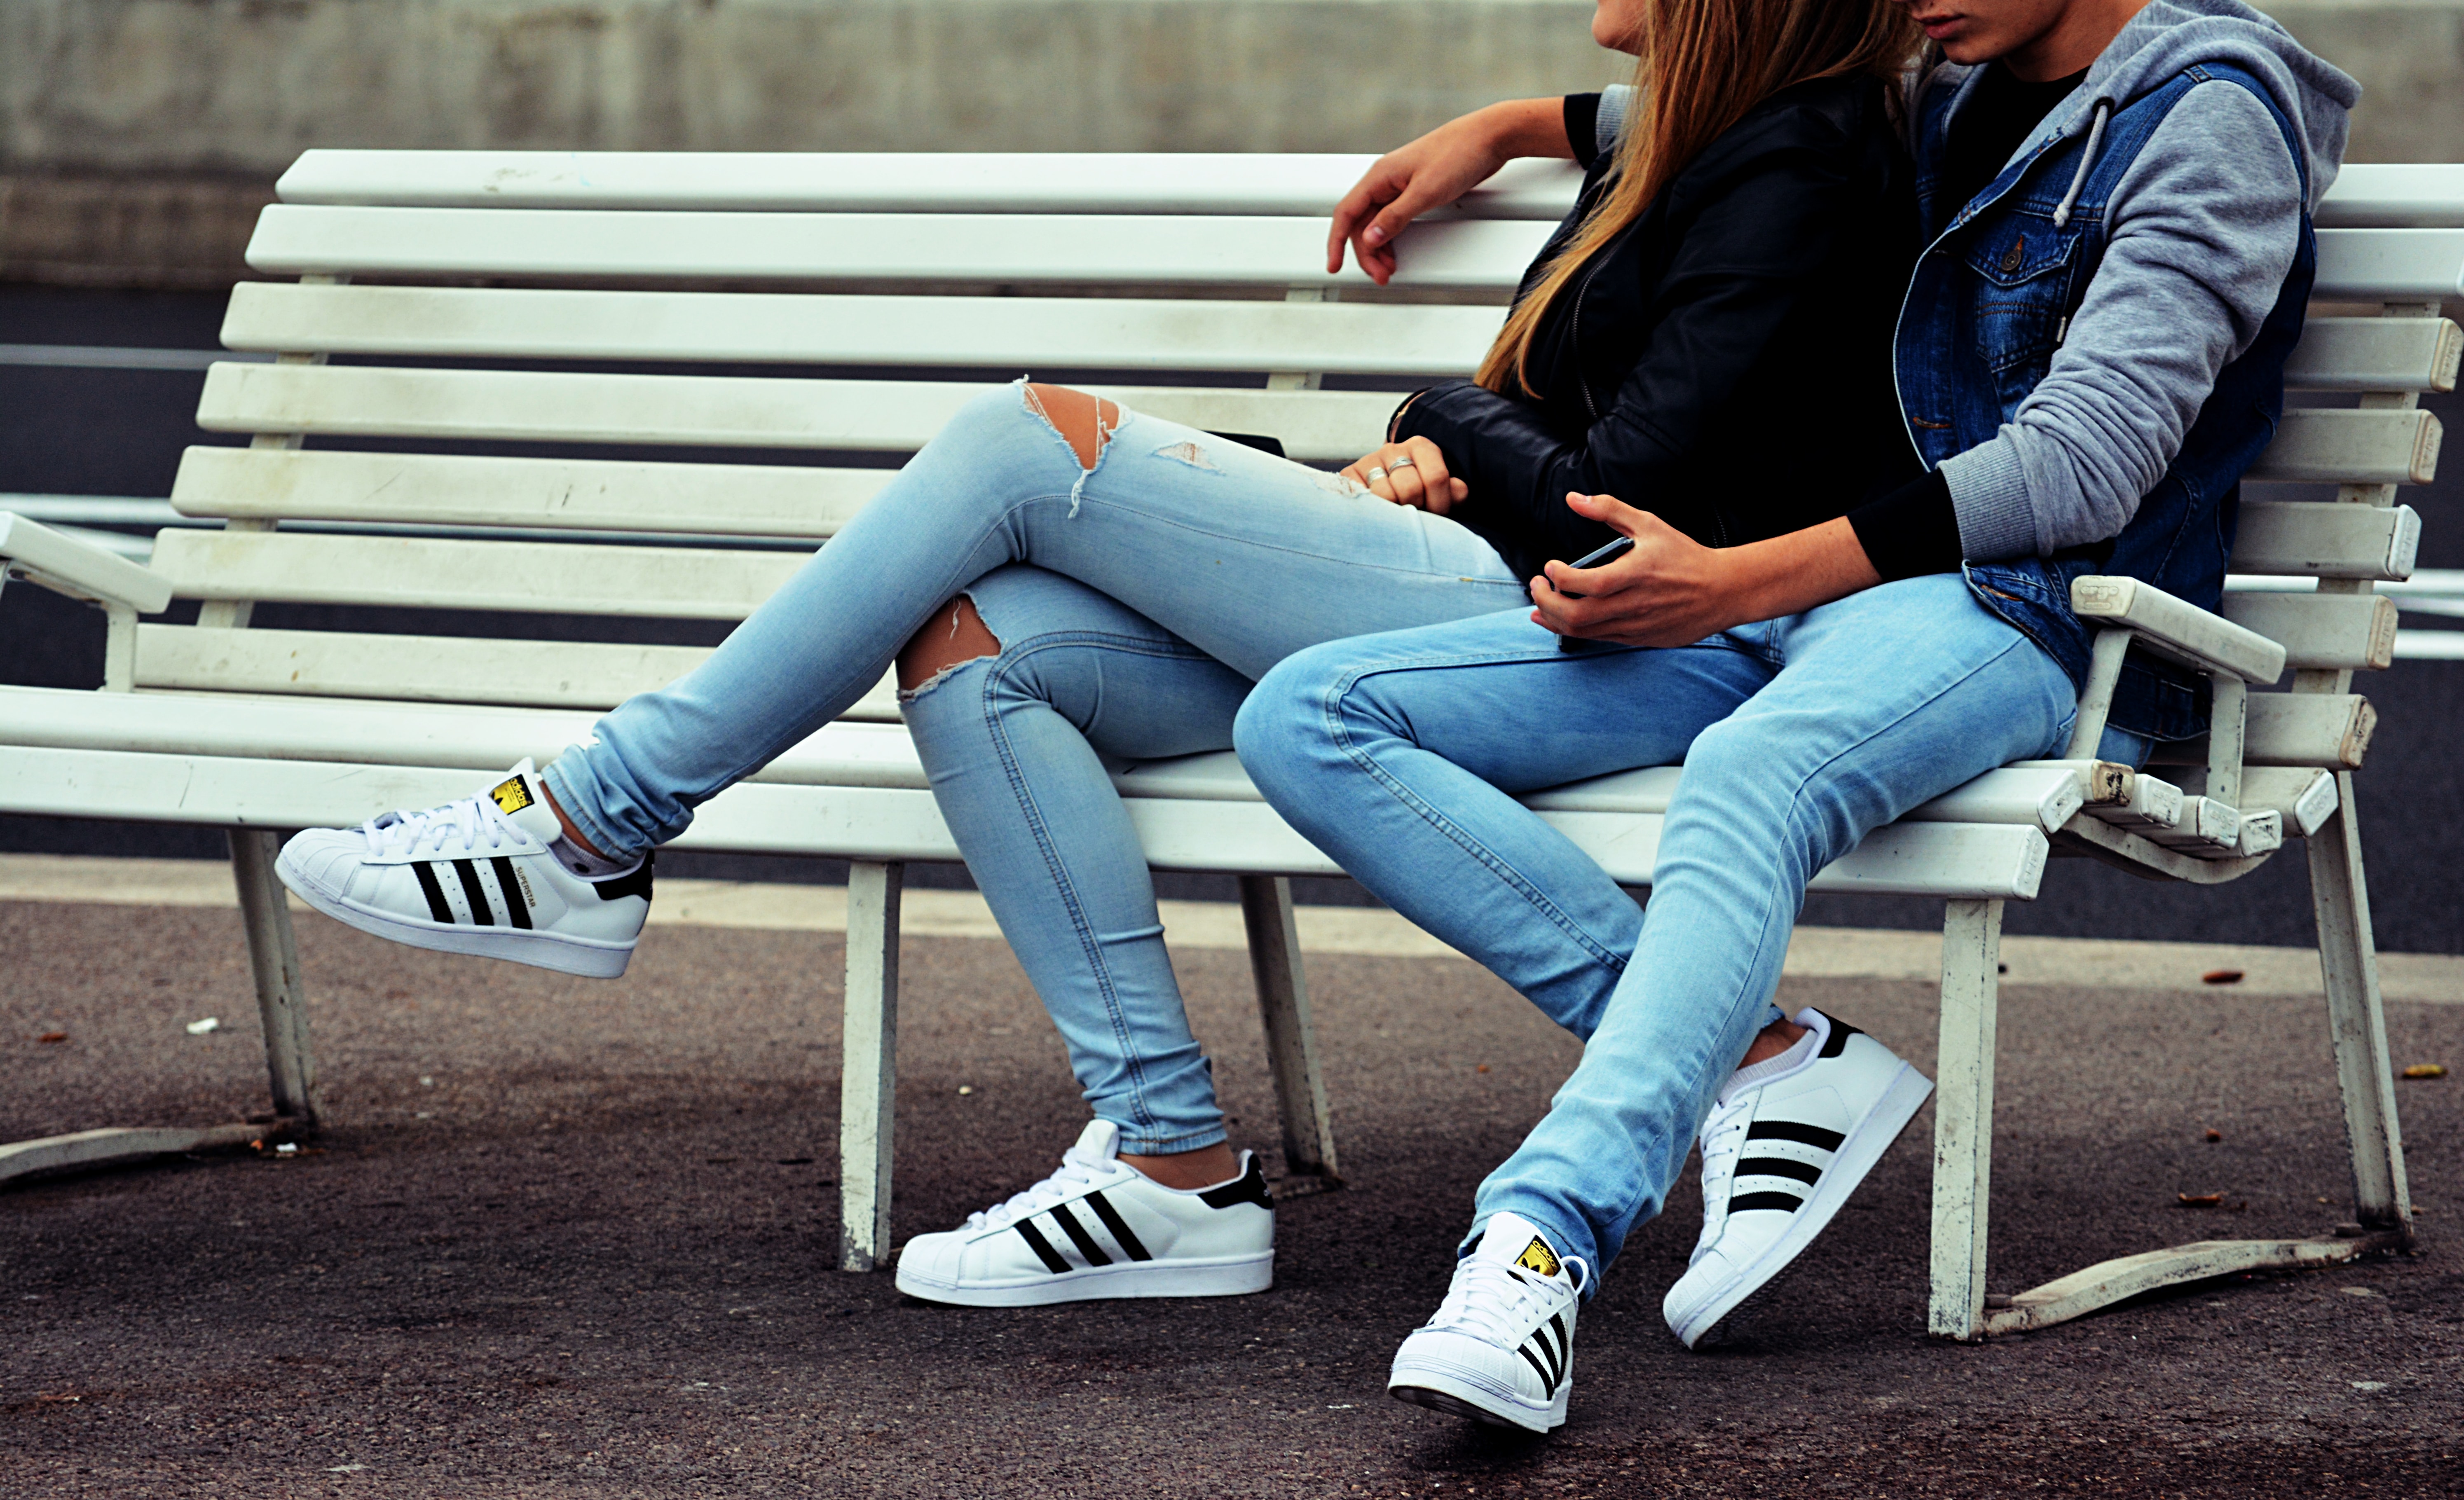 A couple sitting on a bench. | Source: Unsplash